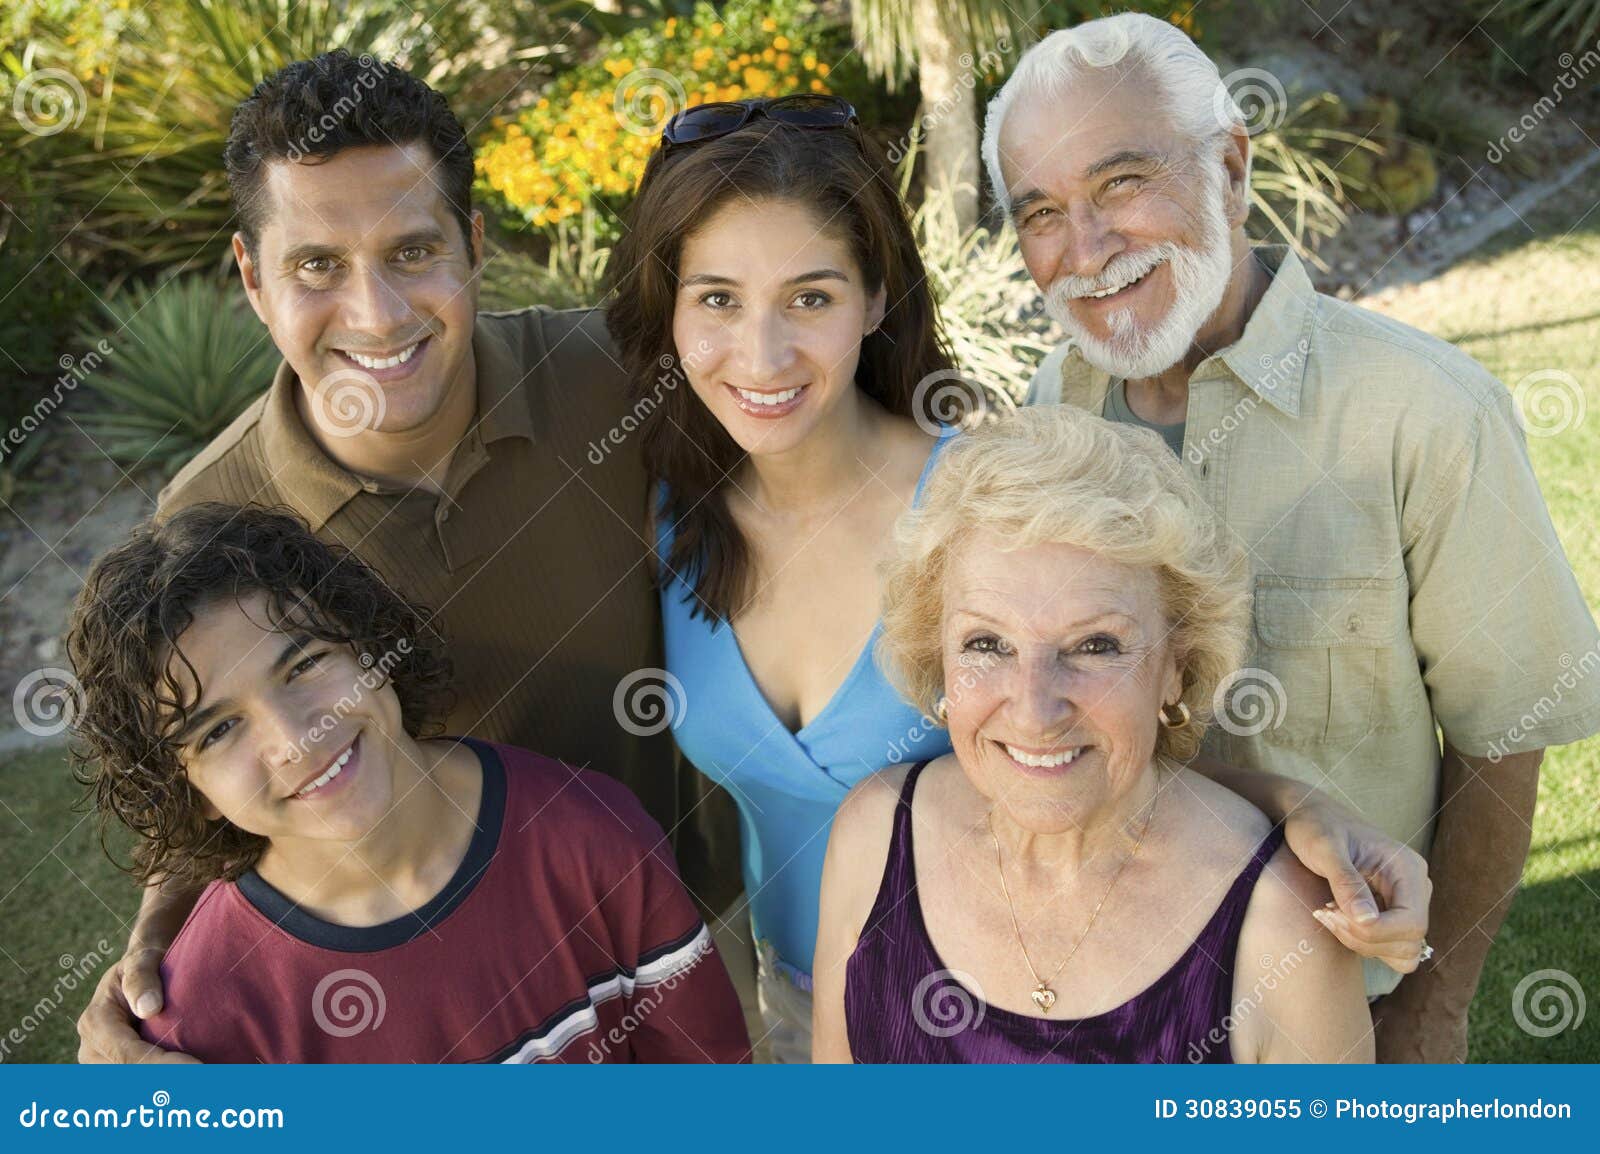 boy (13-15) with parents and grandparents outside elevated view portrait.